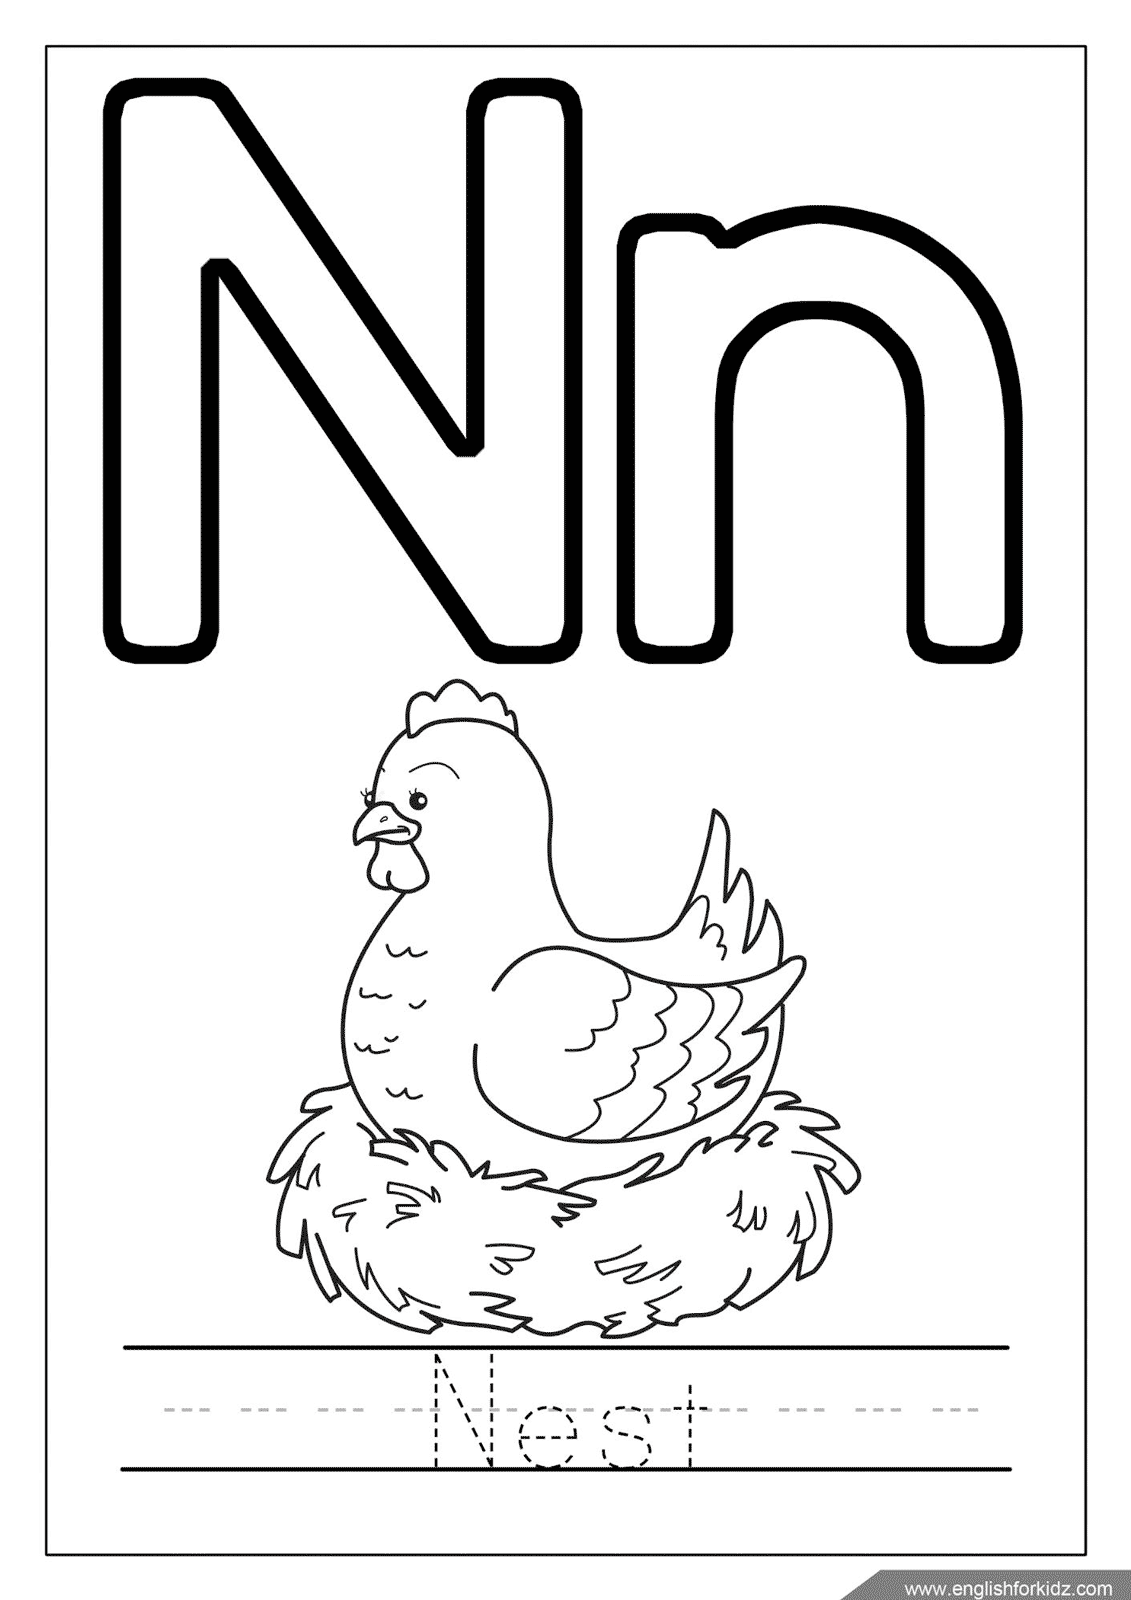 English for kids step by step letter n worksheets flash cards coloring pages